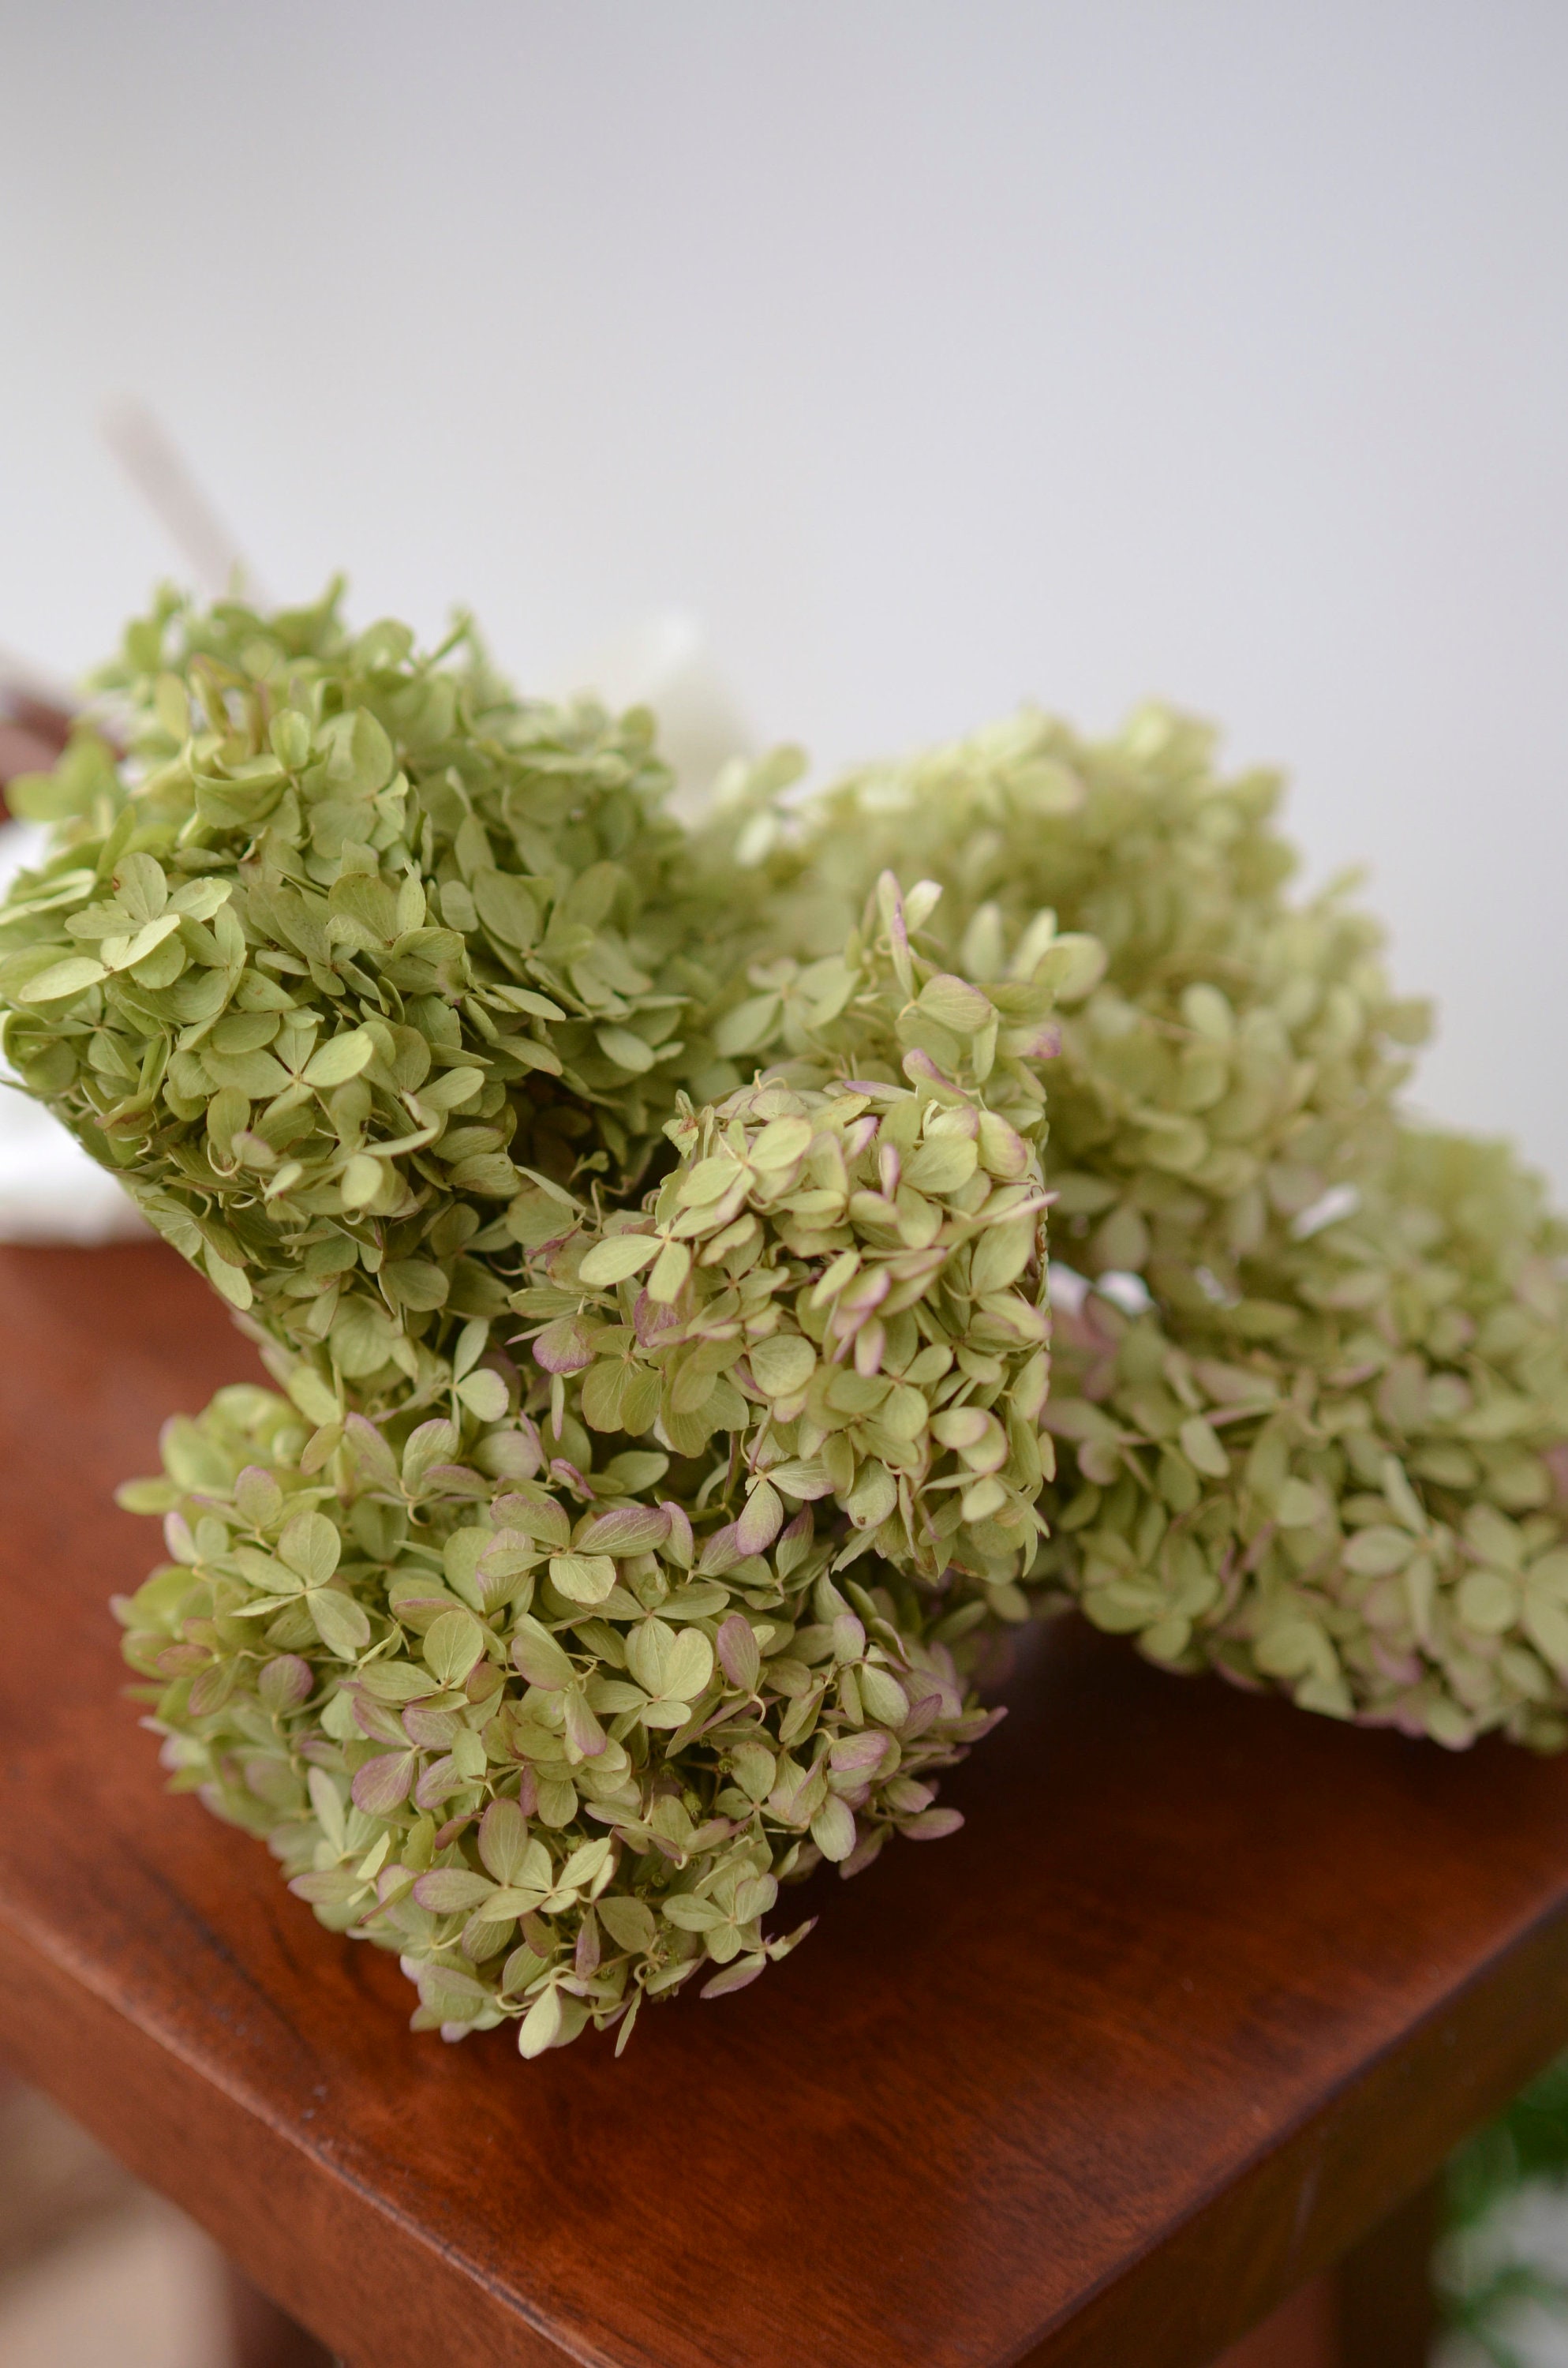 Dried Hydrangea Flowers Antique Creamlight Green and Pink 